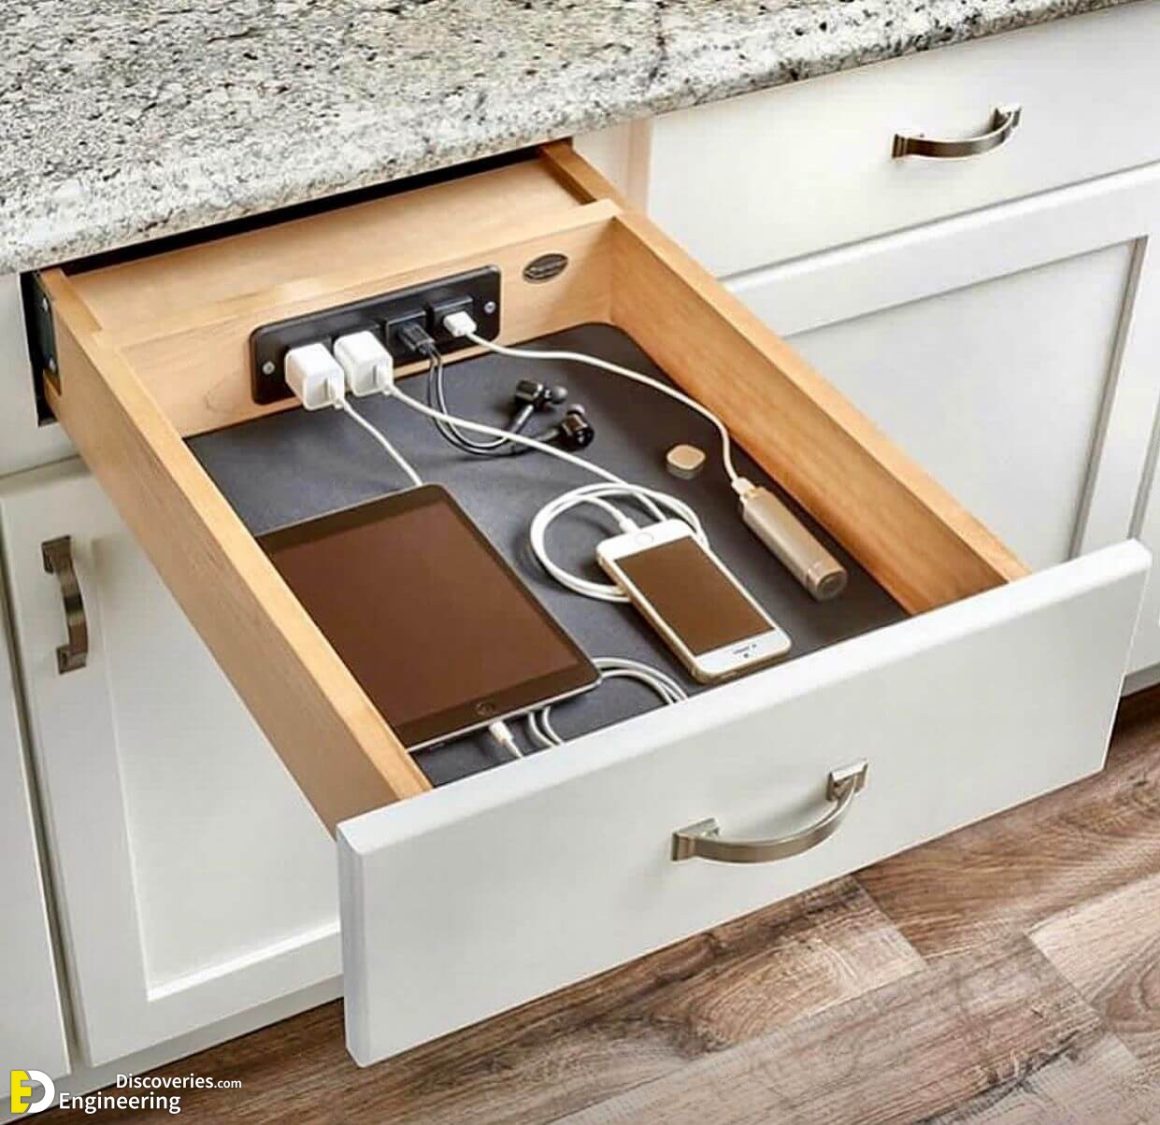 35 Smart Kitchen Organization Decor Ideas To Try Right Now ...